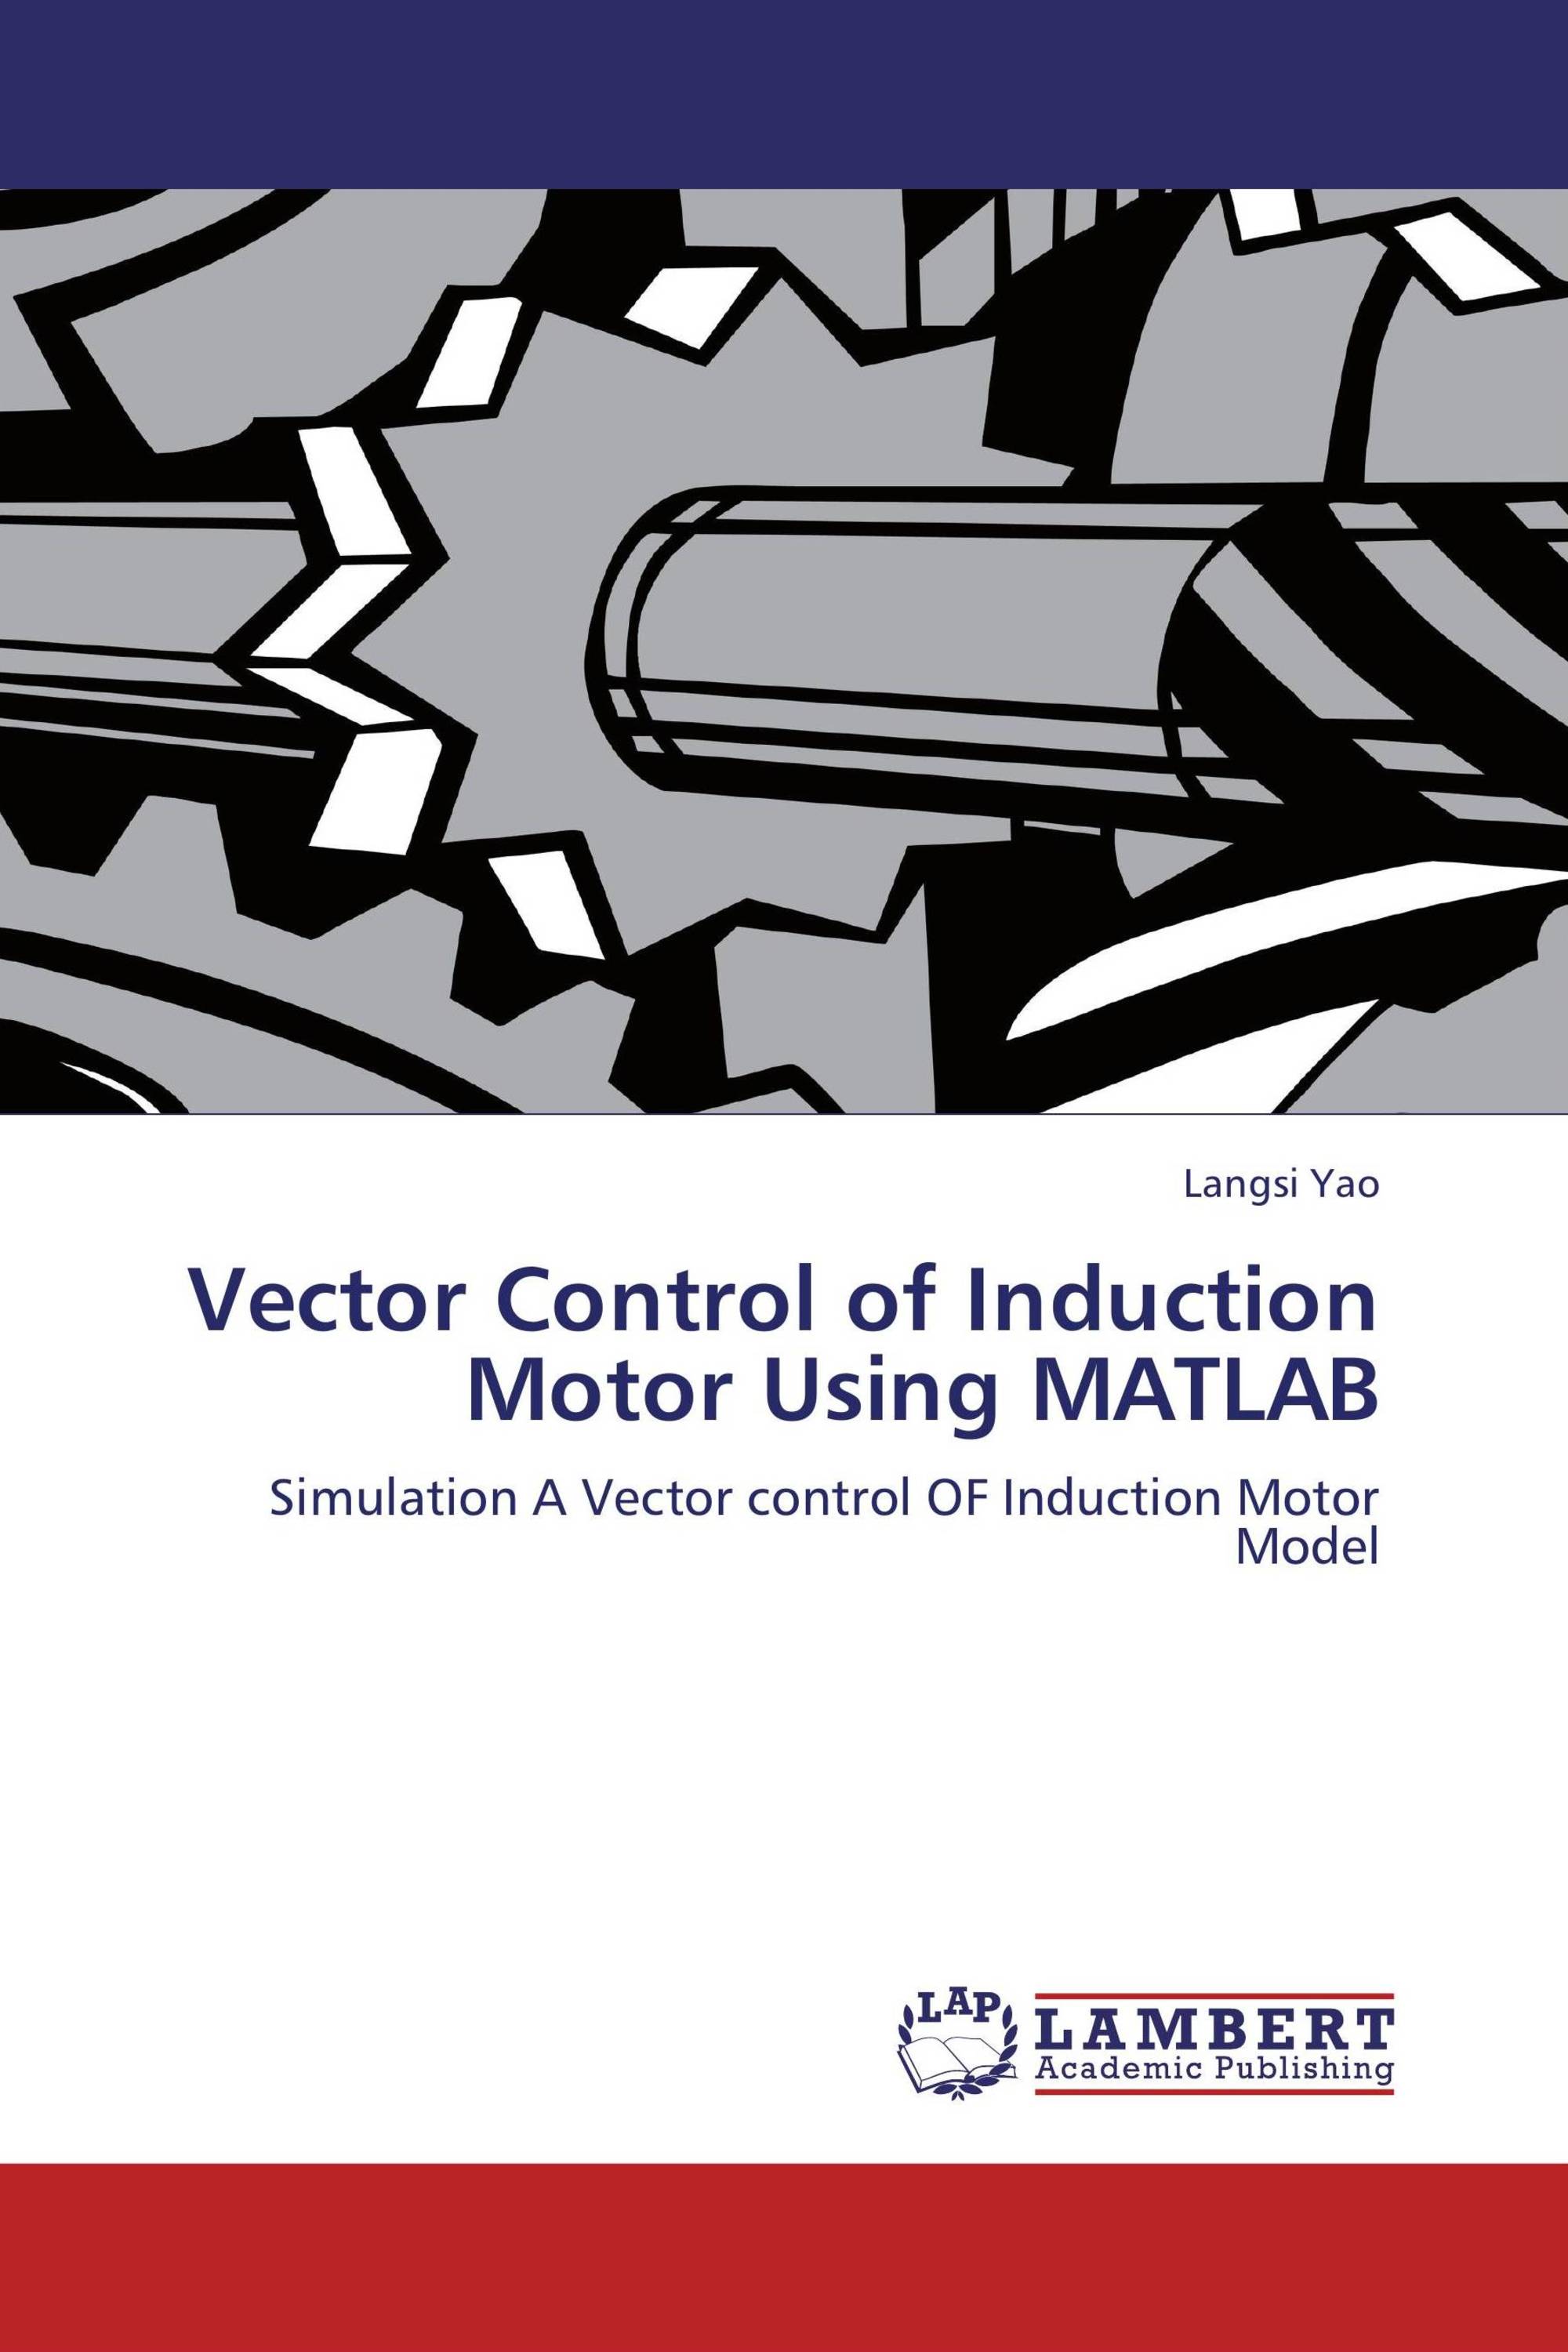 Thesis on induction motor